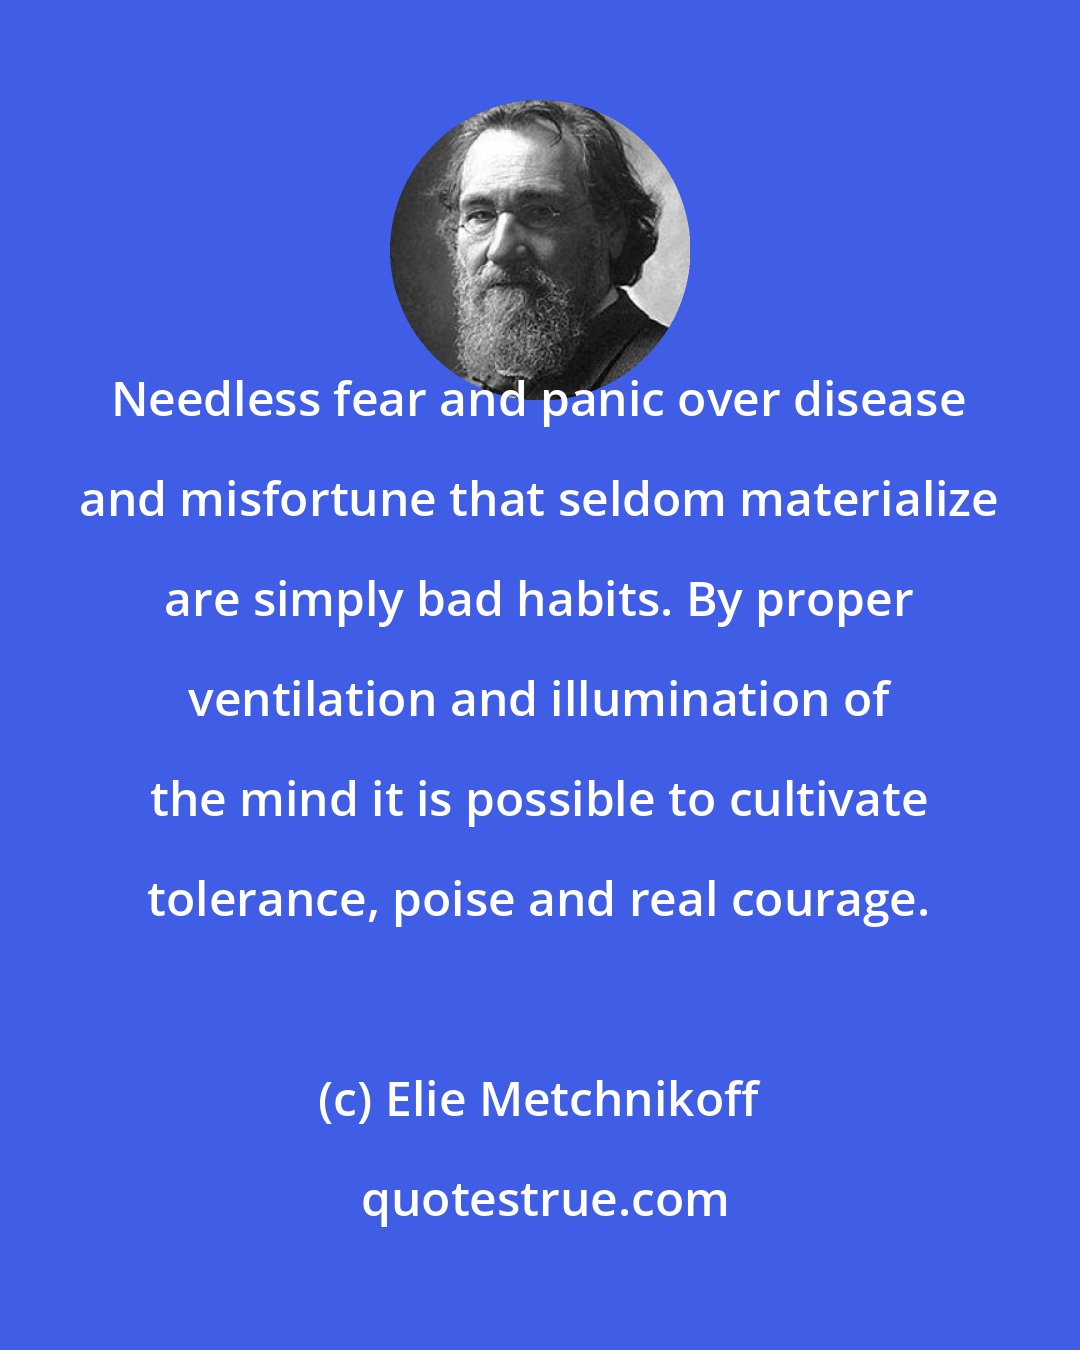 Elie Metchnikoff: Needless fear and panic over disease and misfortune that seldom materialize are simply bad habits. By proper ventilation and illumination of the mind it is possible to cultivate tolerance, poise and real courage.